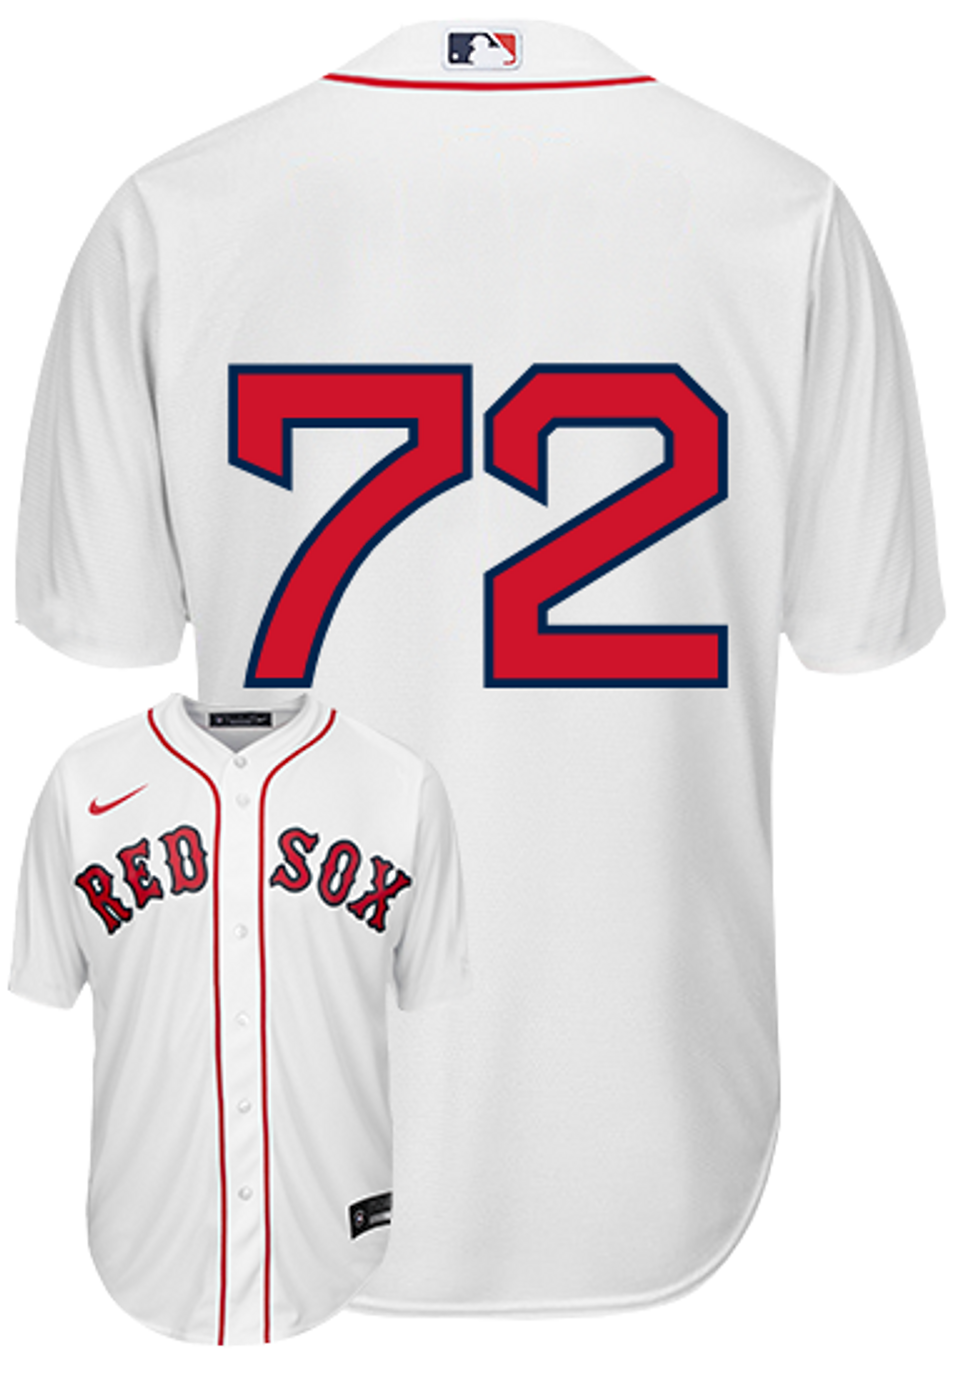 Boston Red Sox Personalized Jerseys Customized Shirts with Any Name and ...